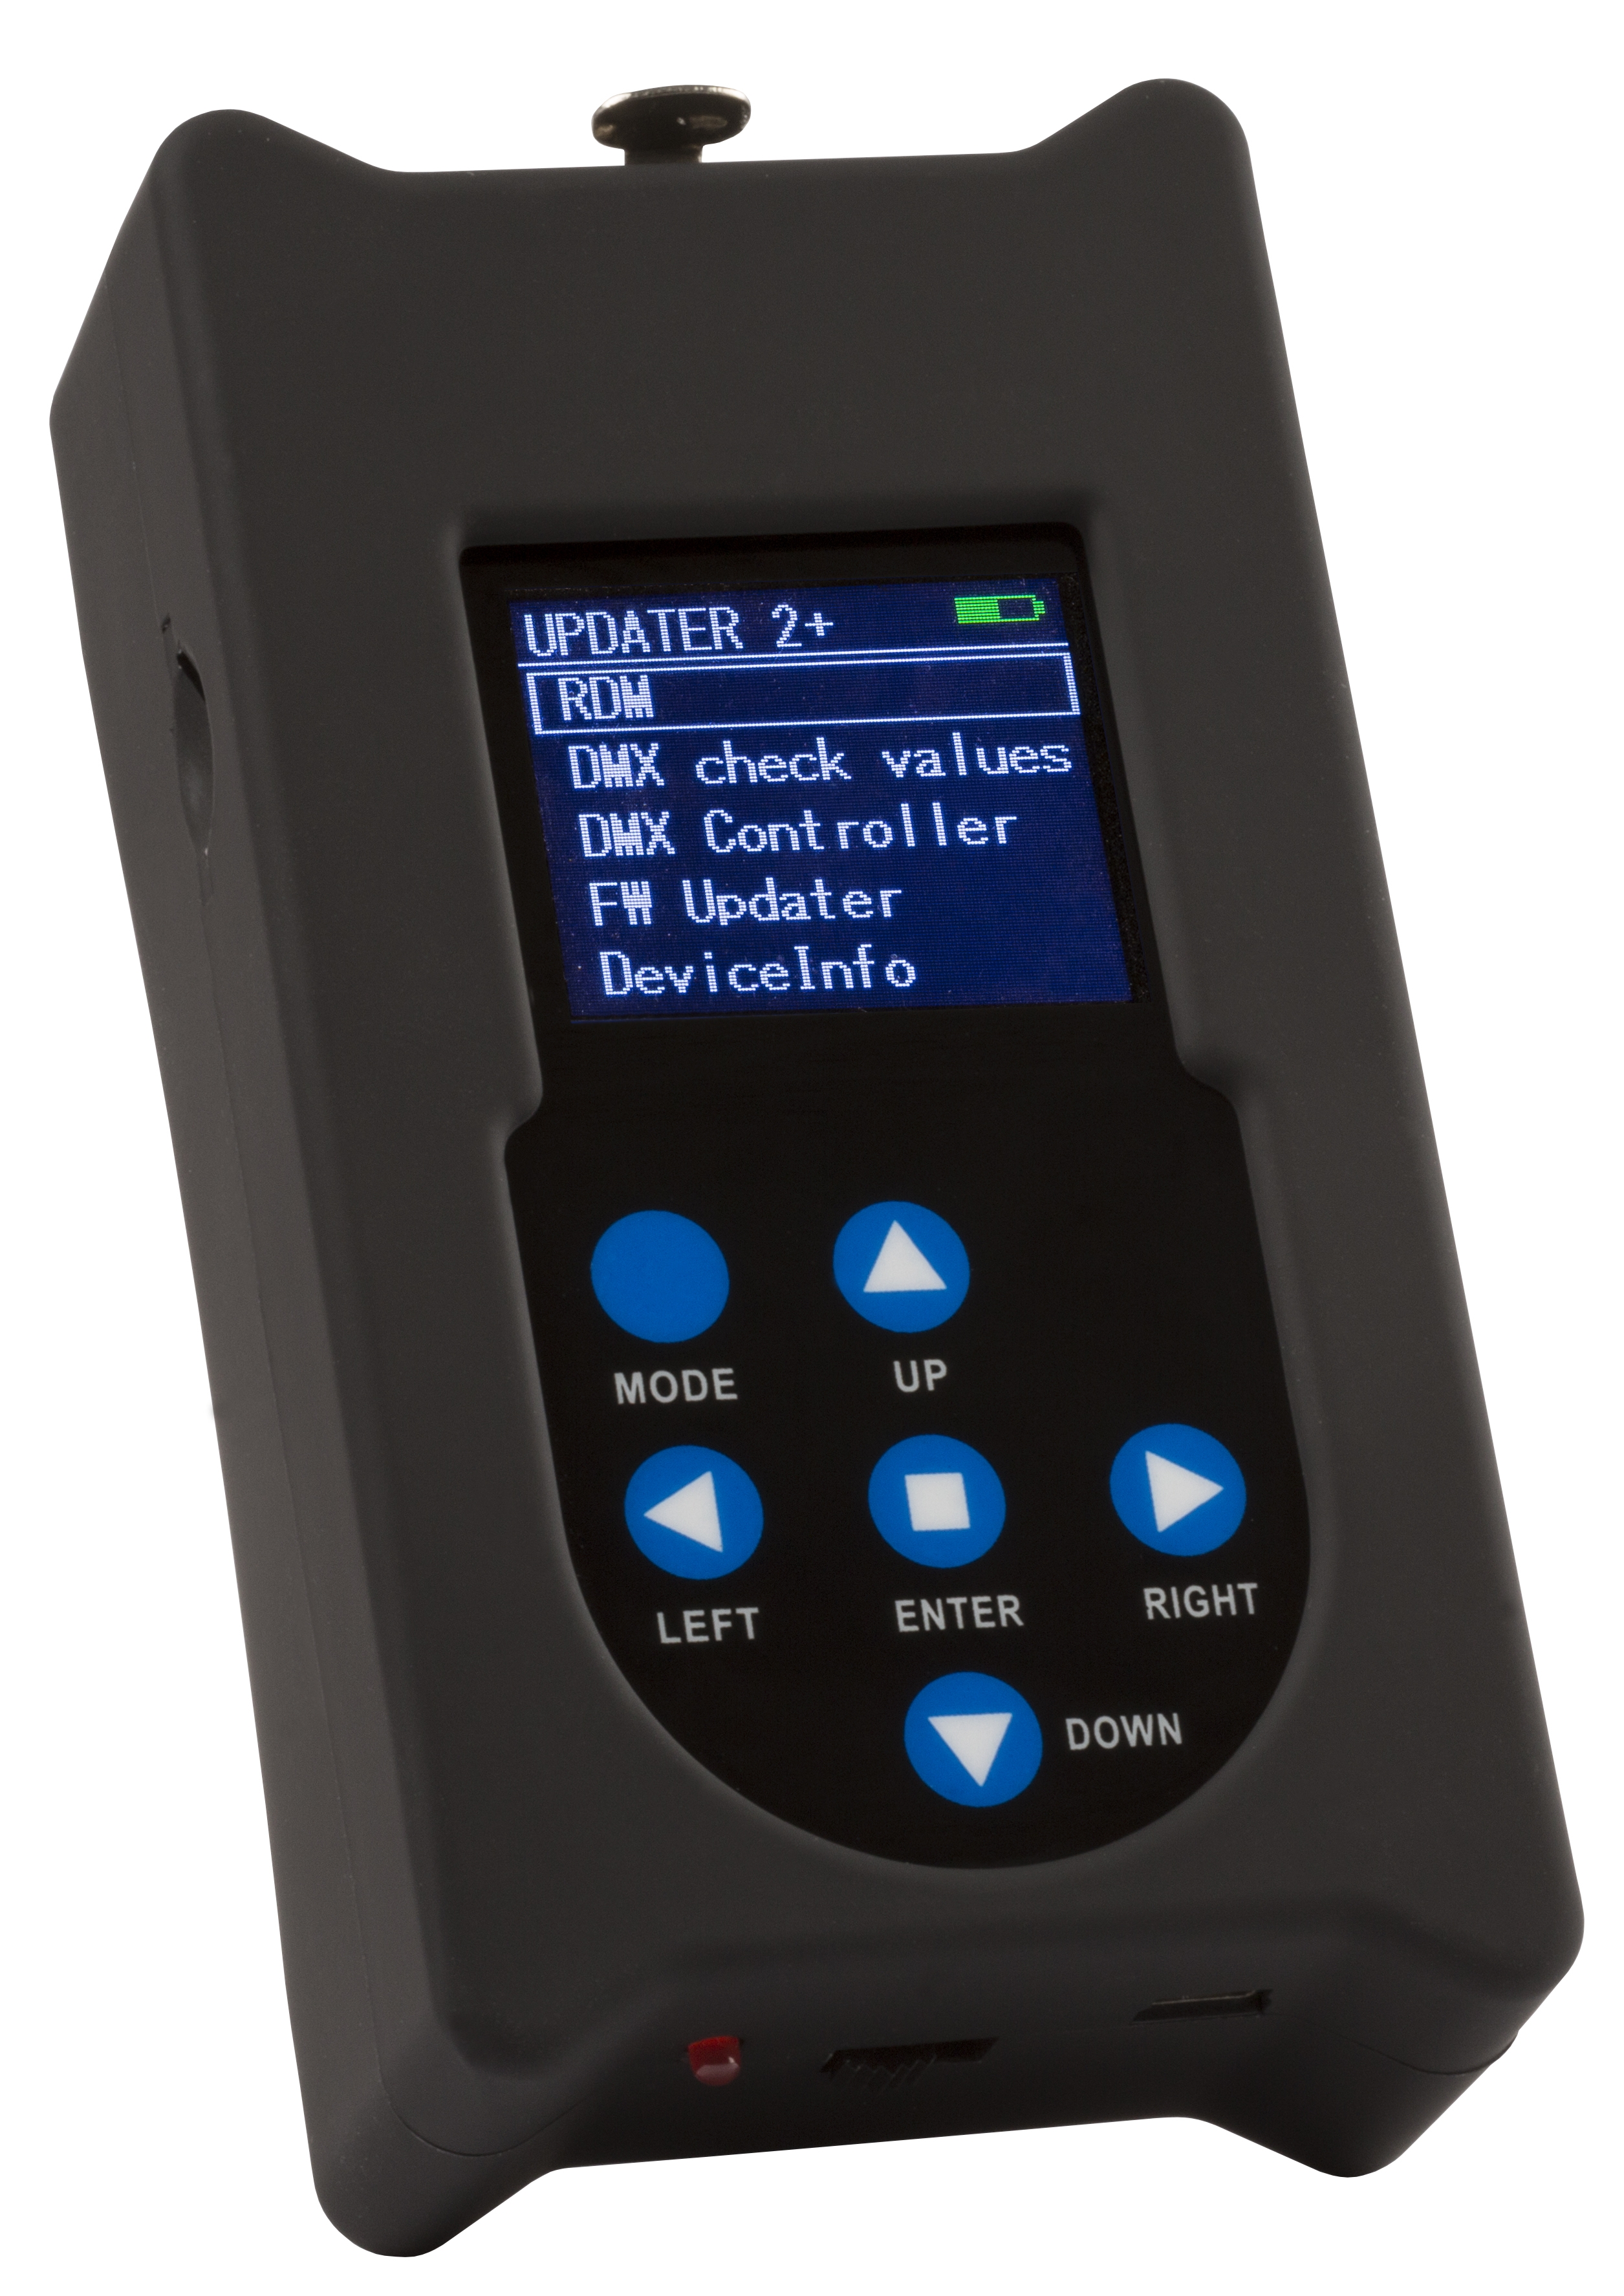 Standalone firmware updater, equipped with additional functions such as RDM, monitoring DMX values, DMX controller with 20 steps program.